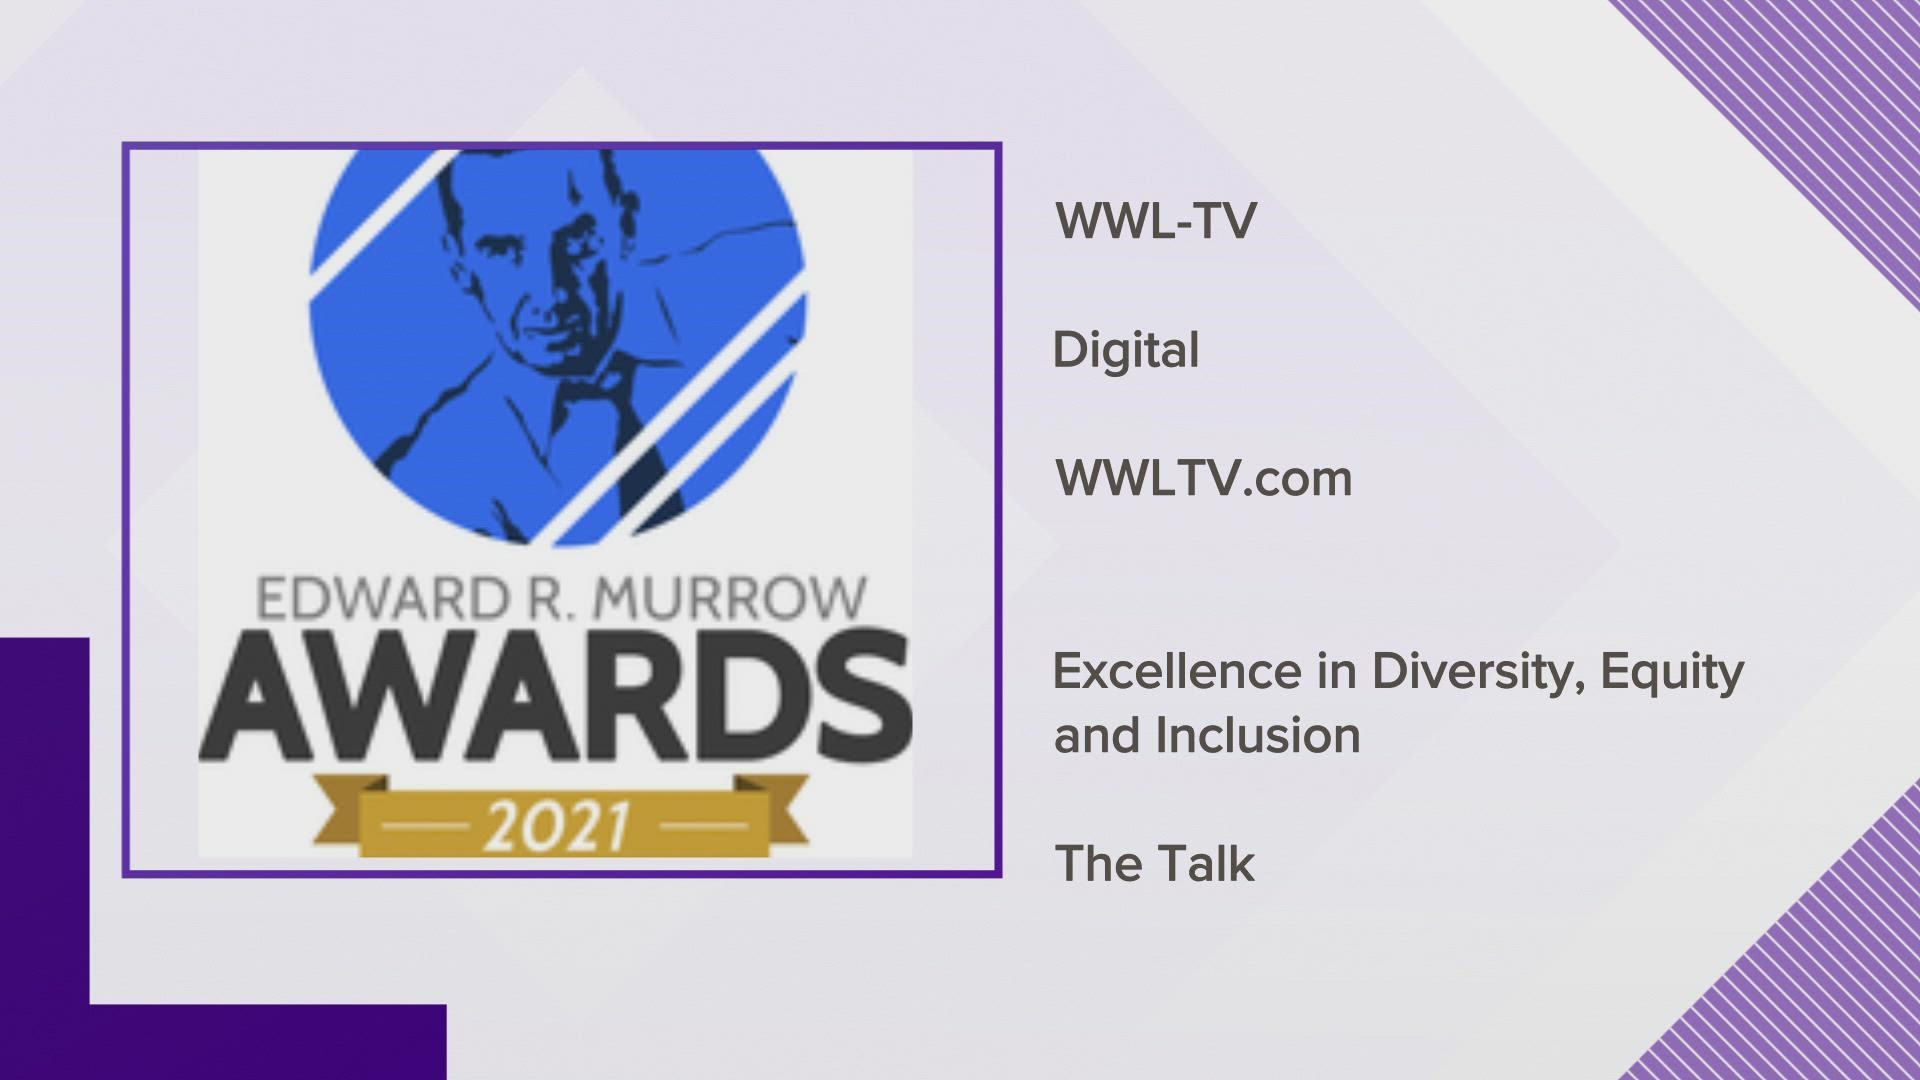 WWL-TV won 2 National Edward R. Murrow Awards for digital coverage and for Excellence in Diversity, Equity and Inclusive coverage.